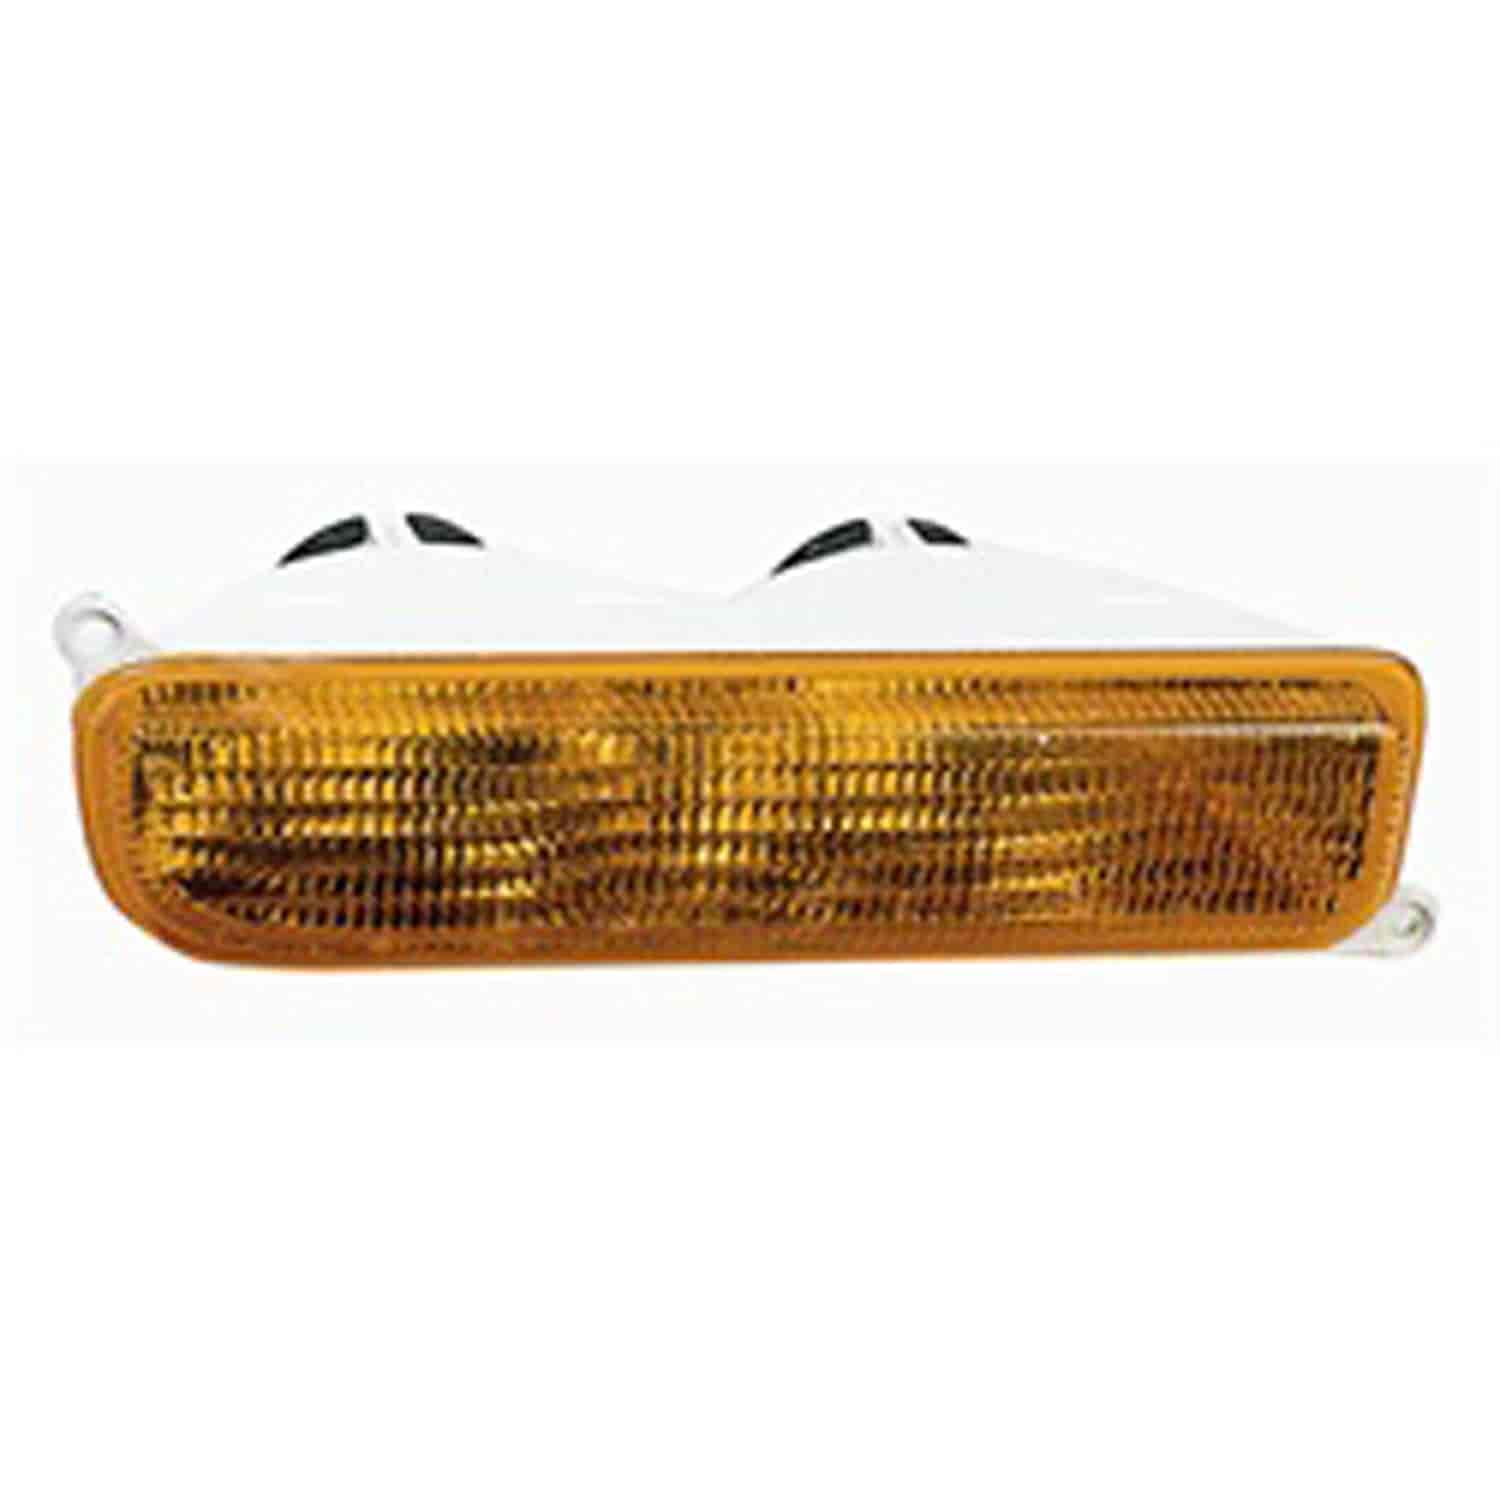 Replacement parking lamp assembly from Omix-ADA, Fits right side of 97-01 Jeep Cherokee XJ